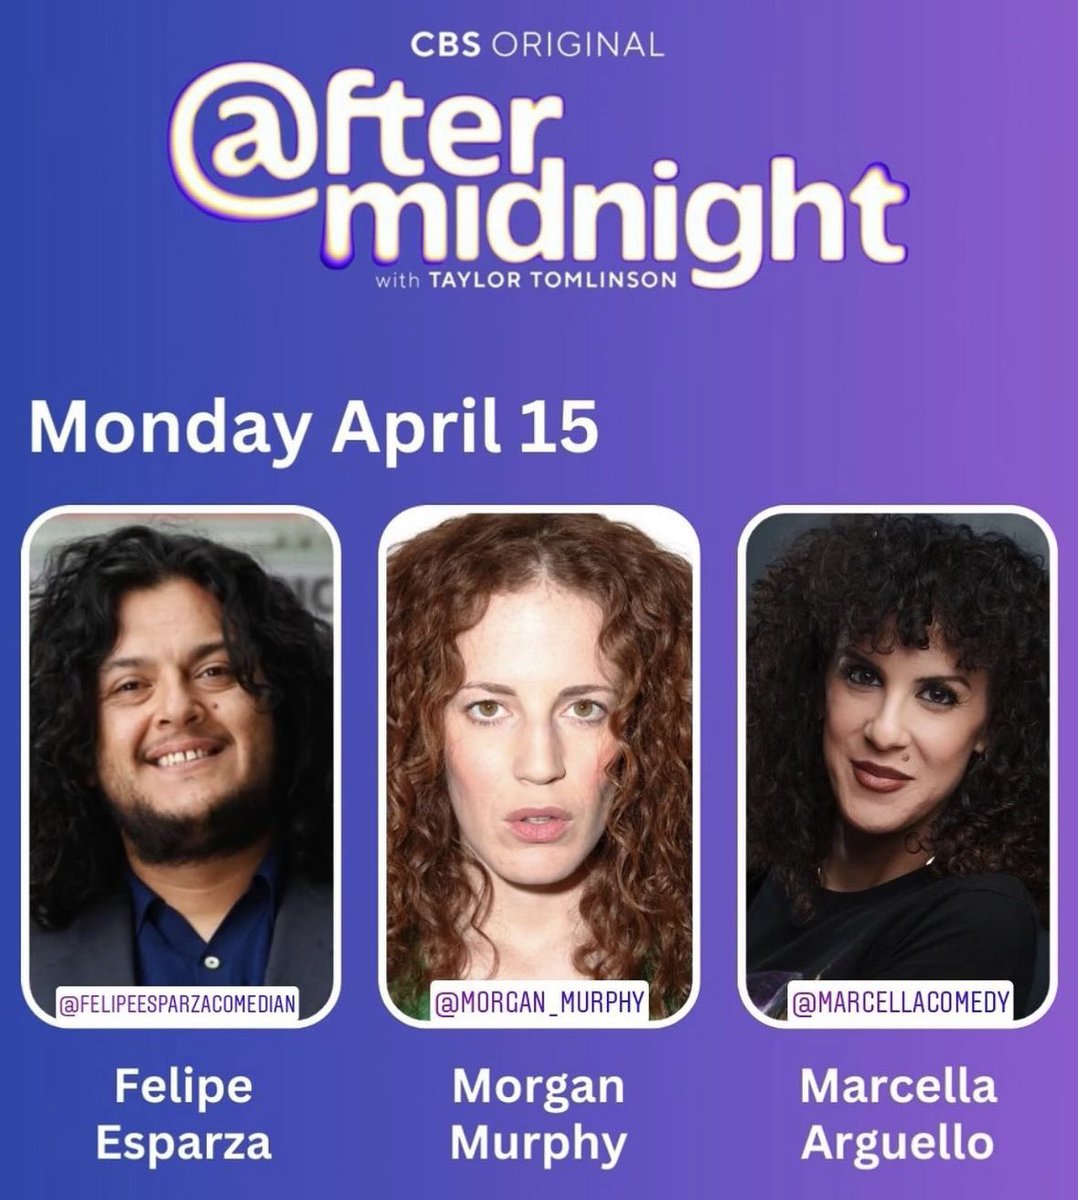 watch the WNBA draft. Then maybe nap or have snacks. Then watch #AfterMidnight?!